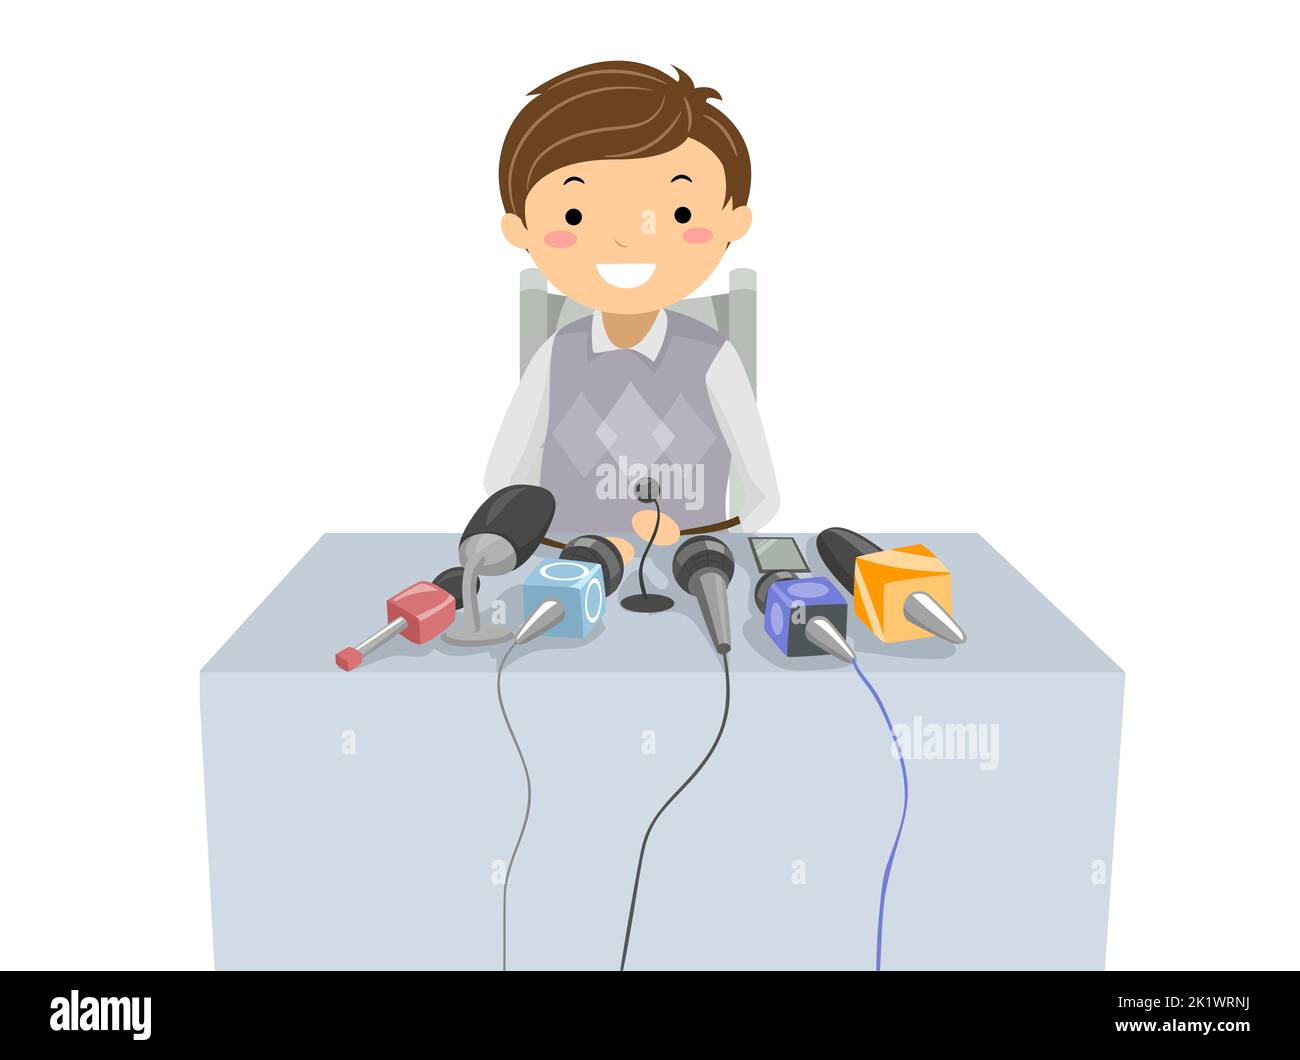 Illustration of Stickman Teen Boy in Press Conference Sitting in Front of Microphones Stock Photo